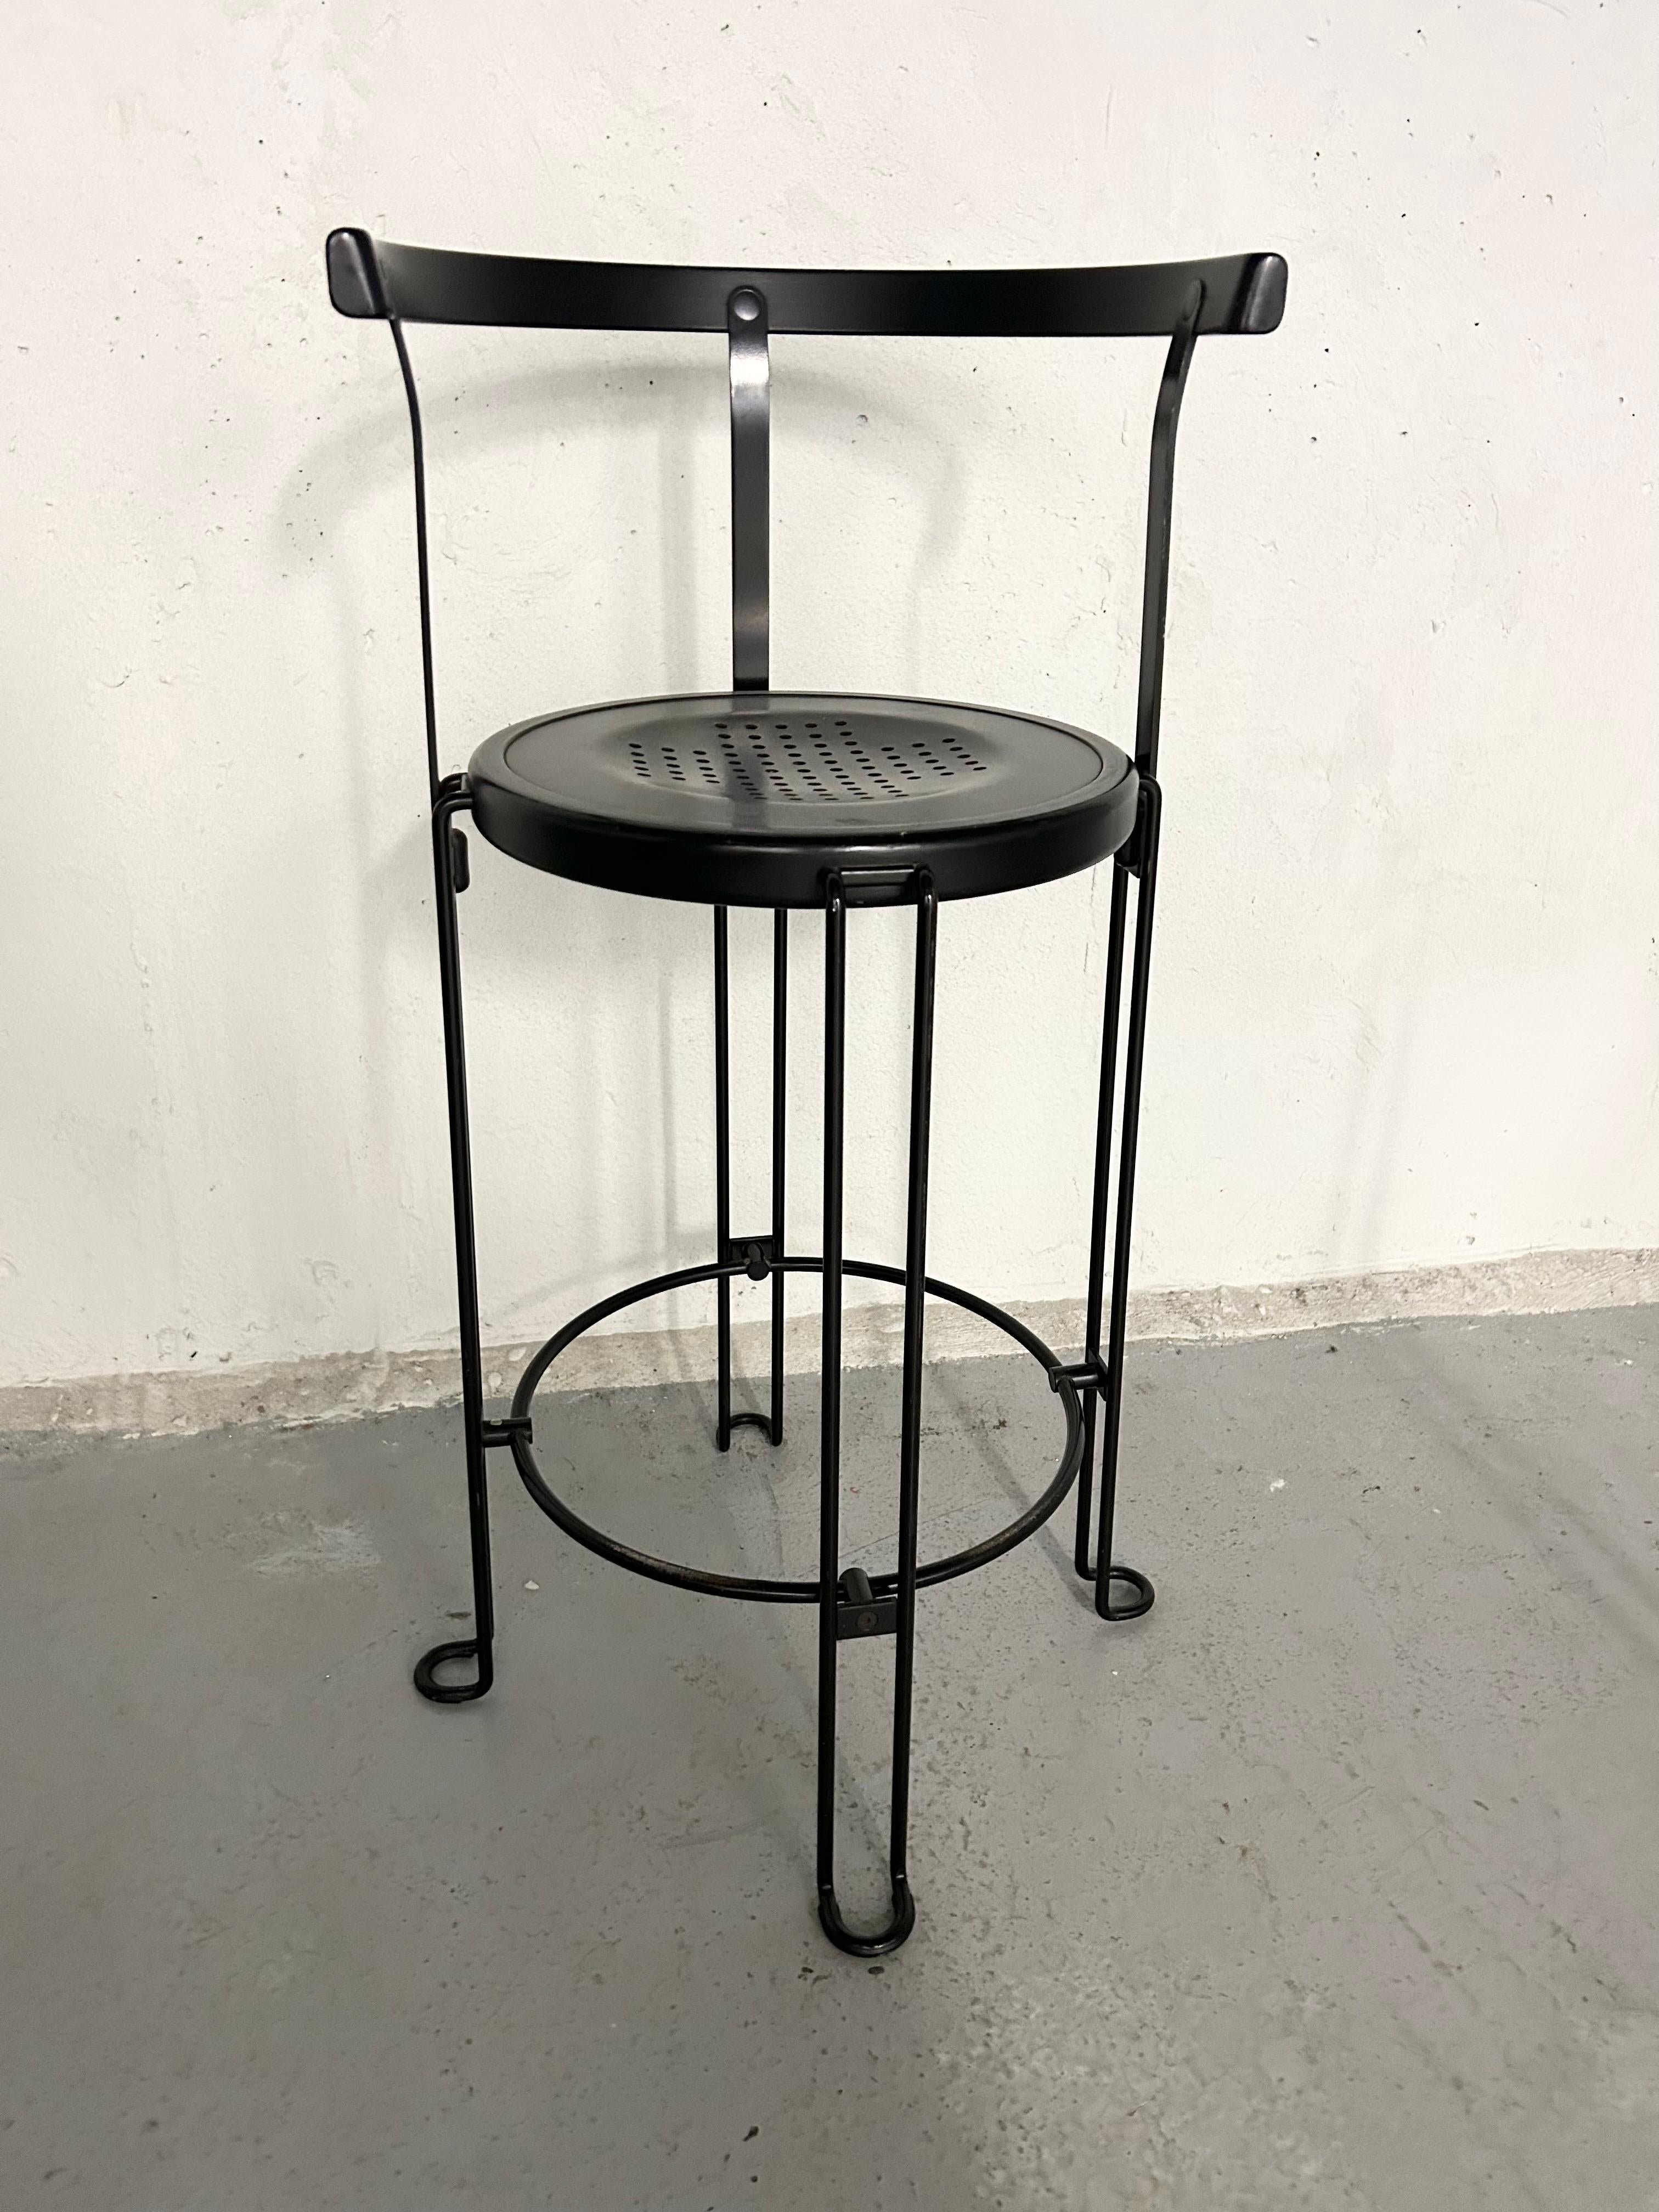 Late 20th Century Borge Lindau for Bla Station Sweden, 1986 B4-65 Counter Height Stool